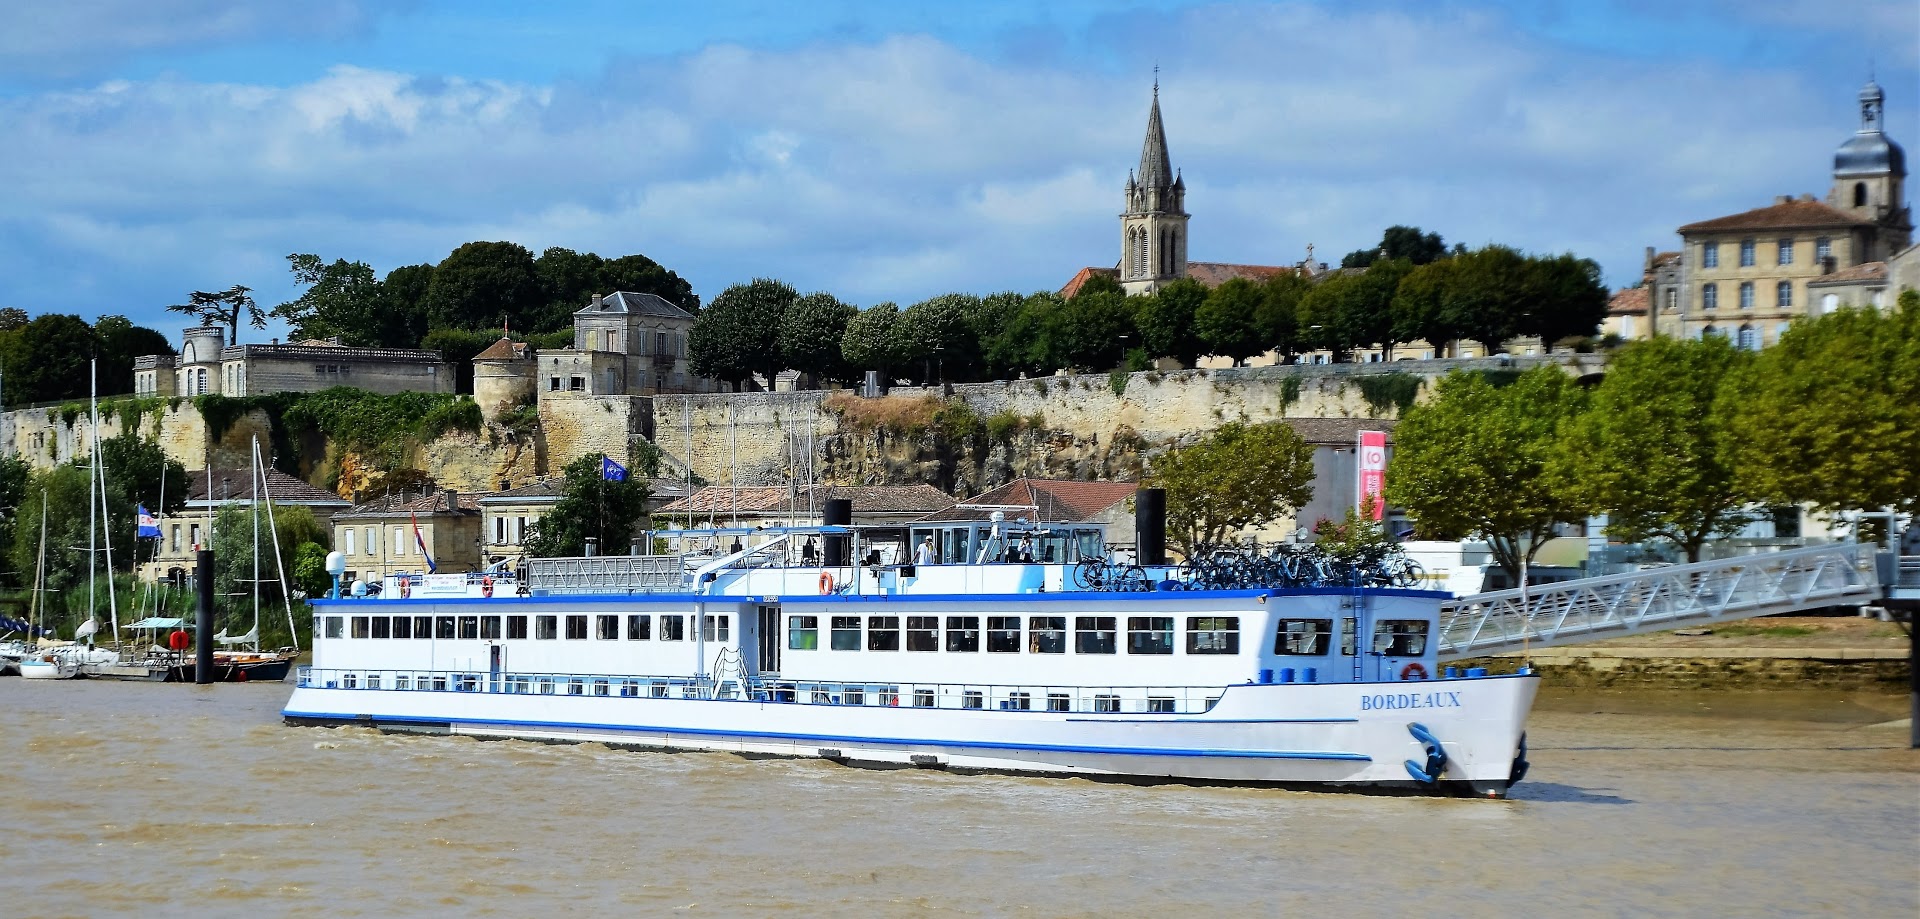 Bike & Cruise:  Bordeaux wine route - Chateaux, Rivers and Wine (2019)